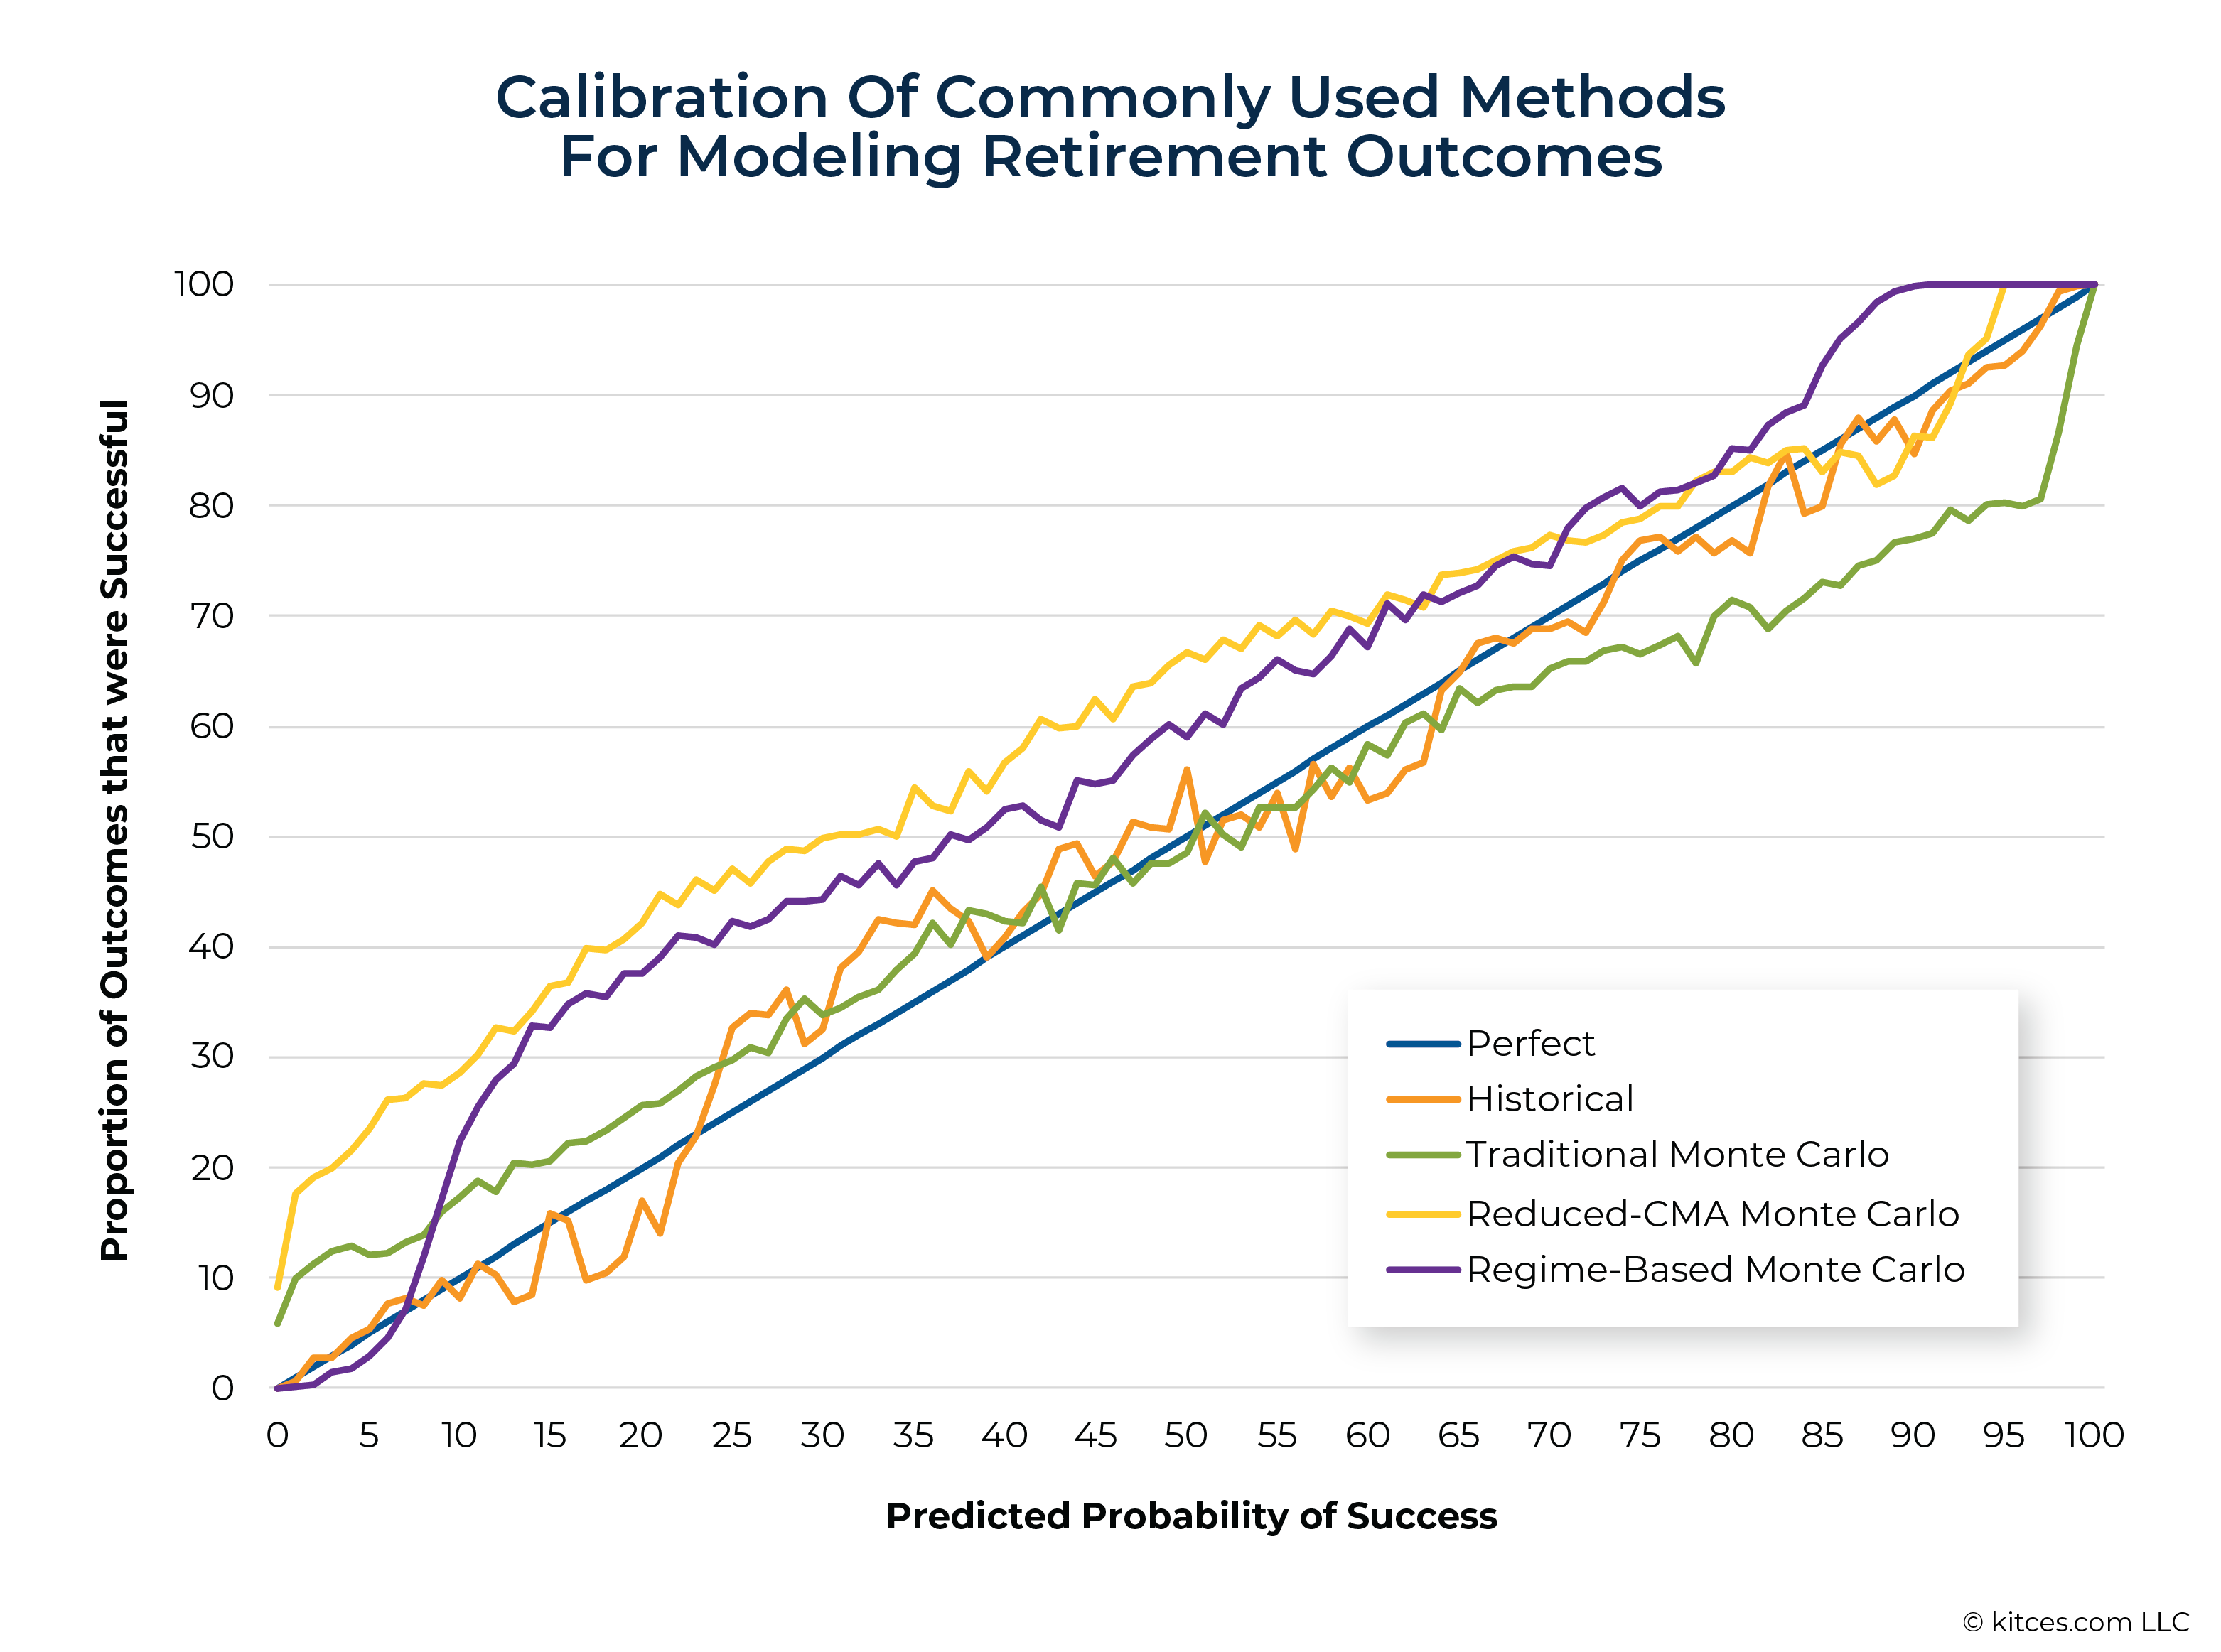 Calibration Of Commonly Used Methods For Modeling Retirement Outcomes